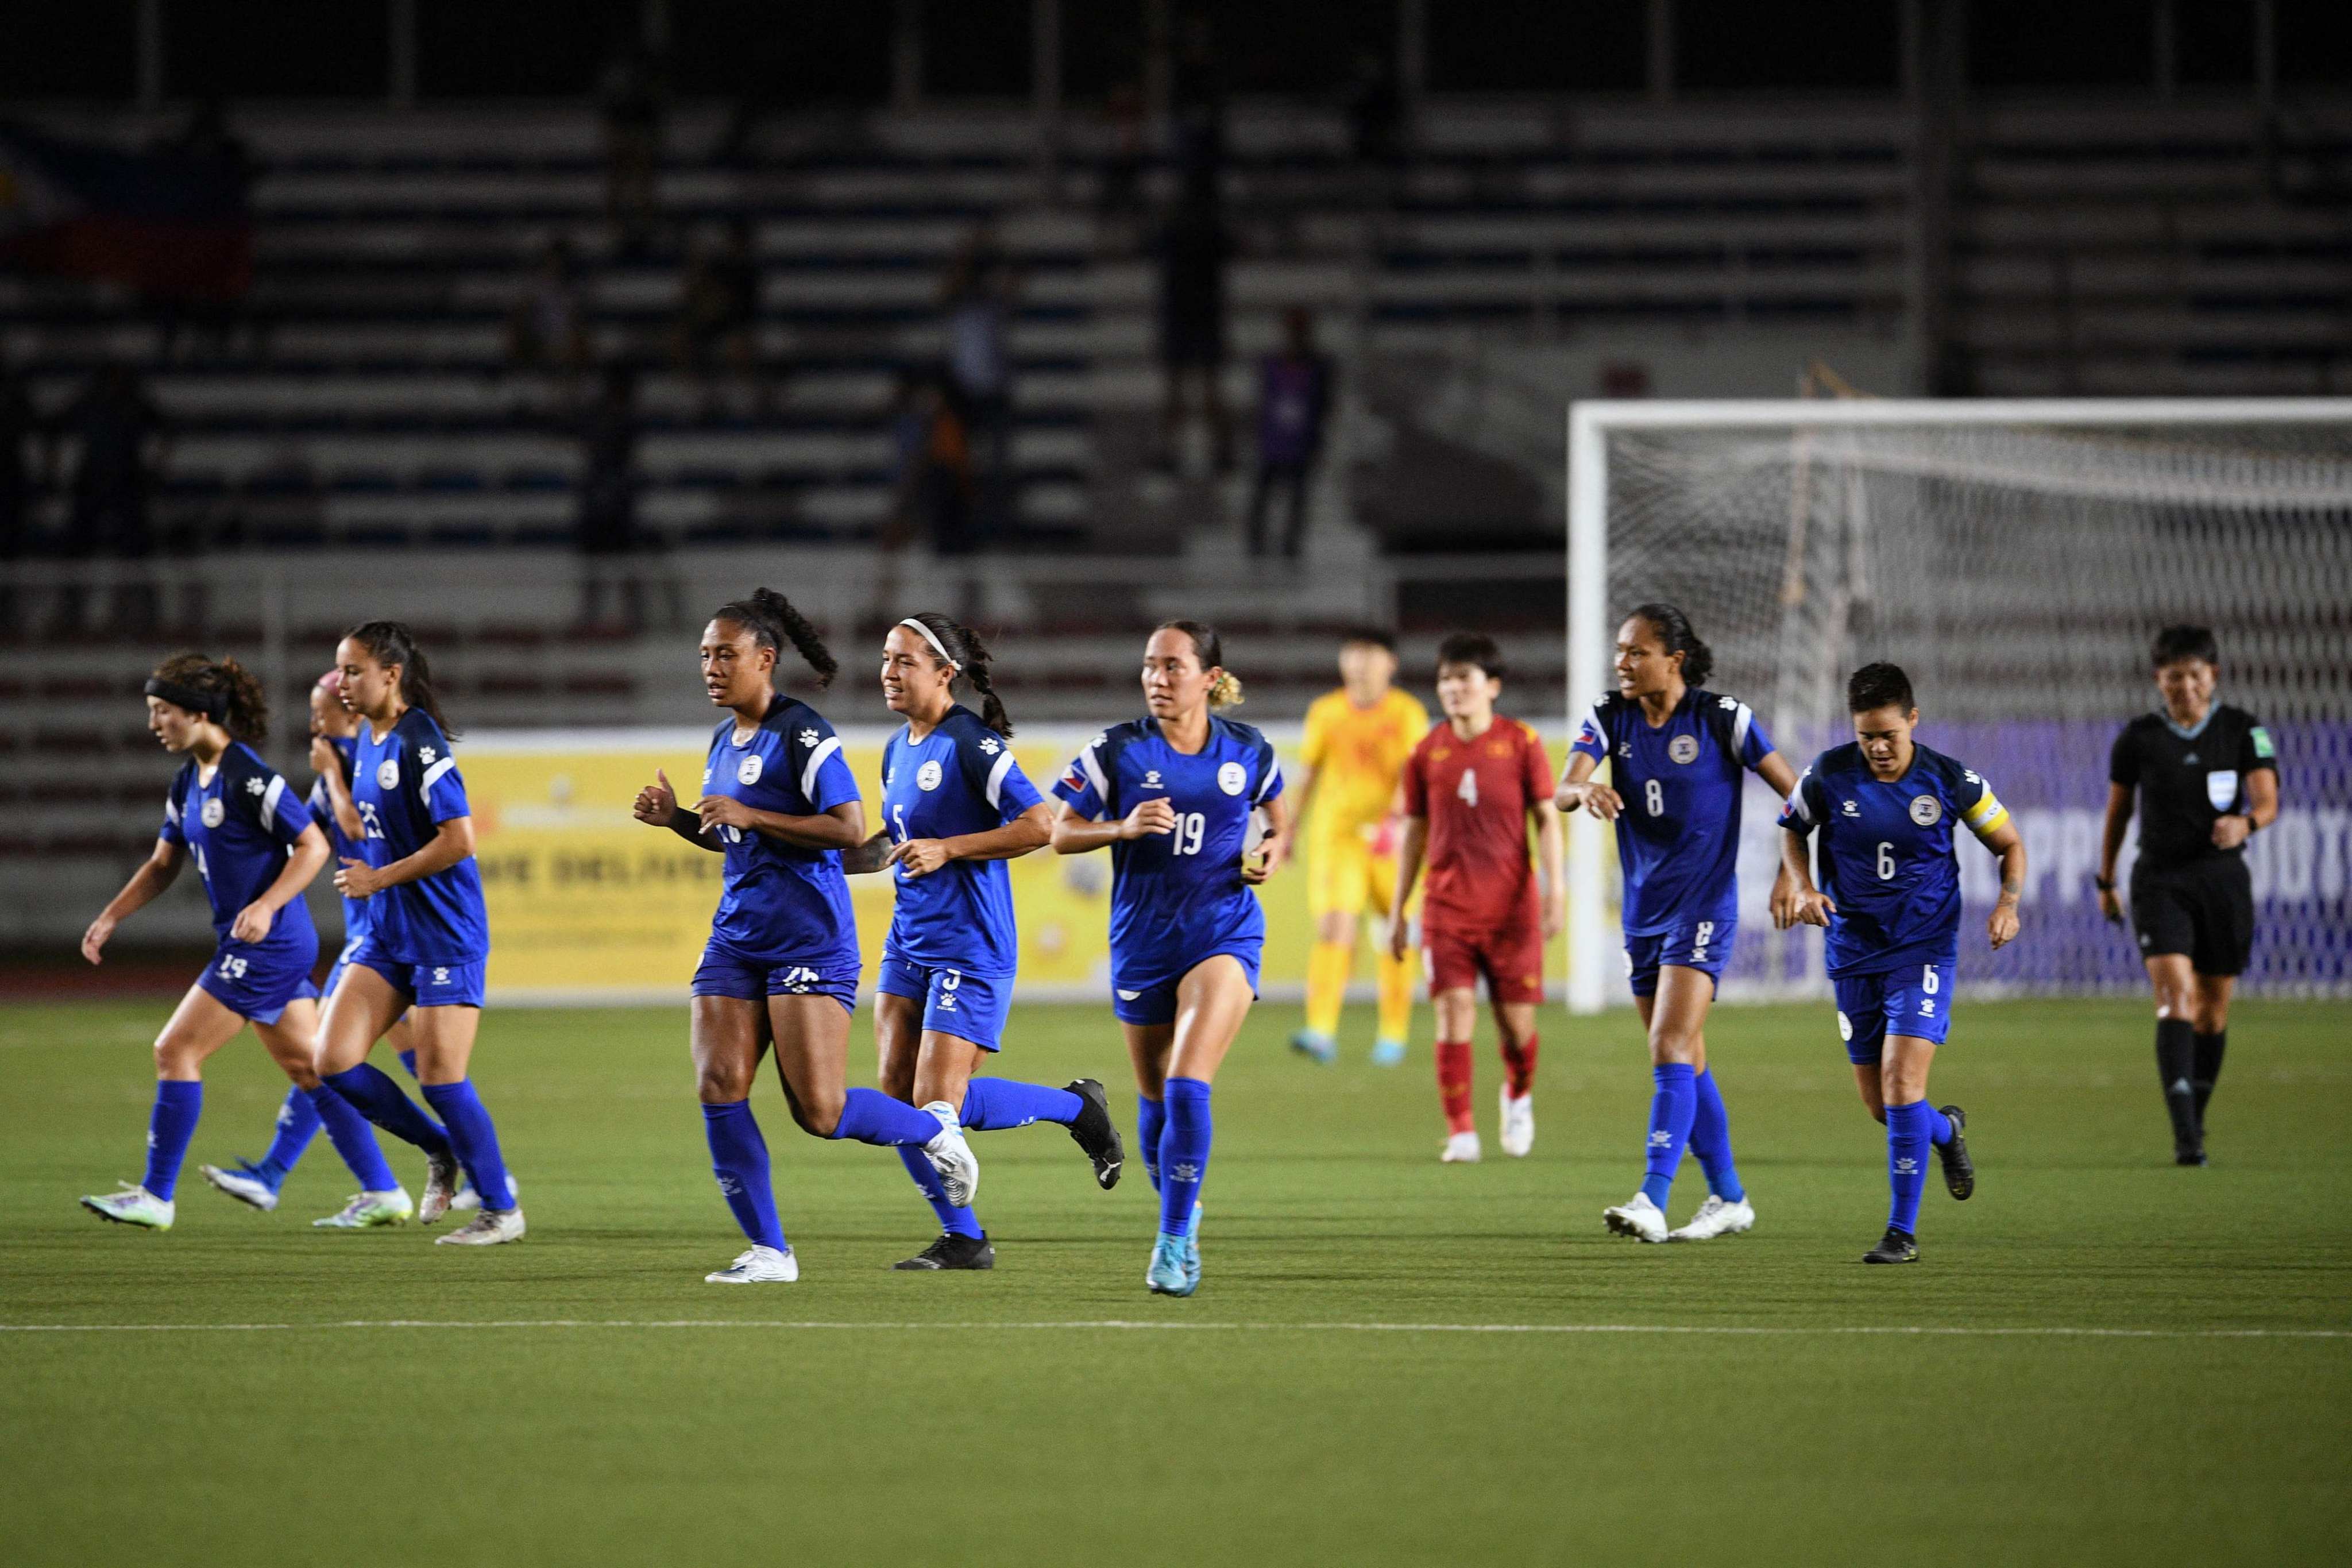 The Philippine women’s team hope to further ignite interest in football in their country in the coming weeks. Photo: AFP